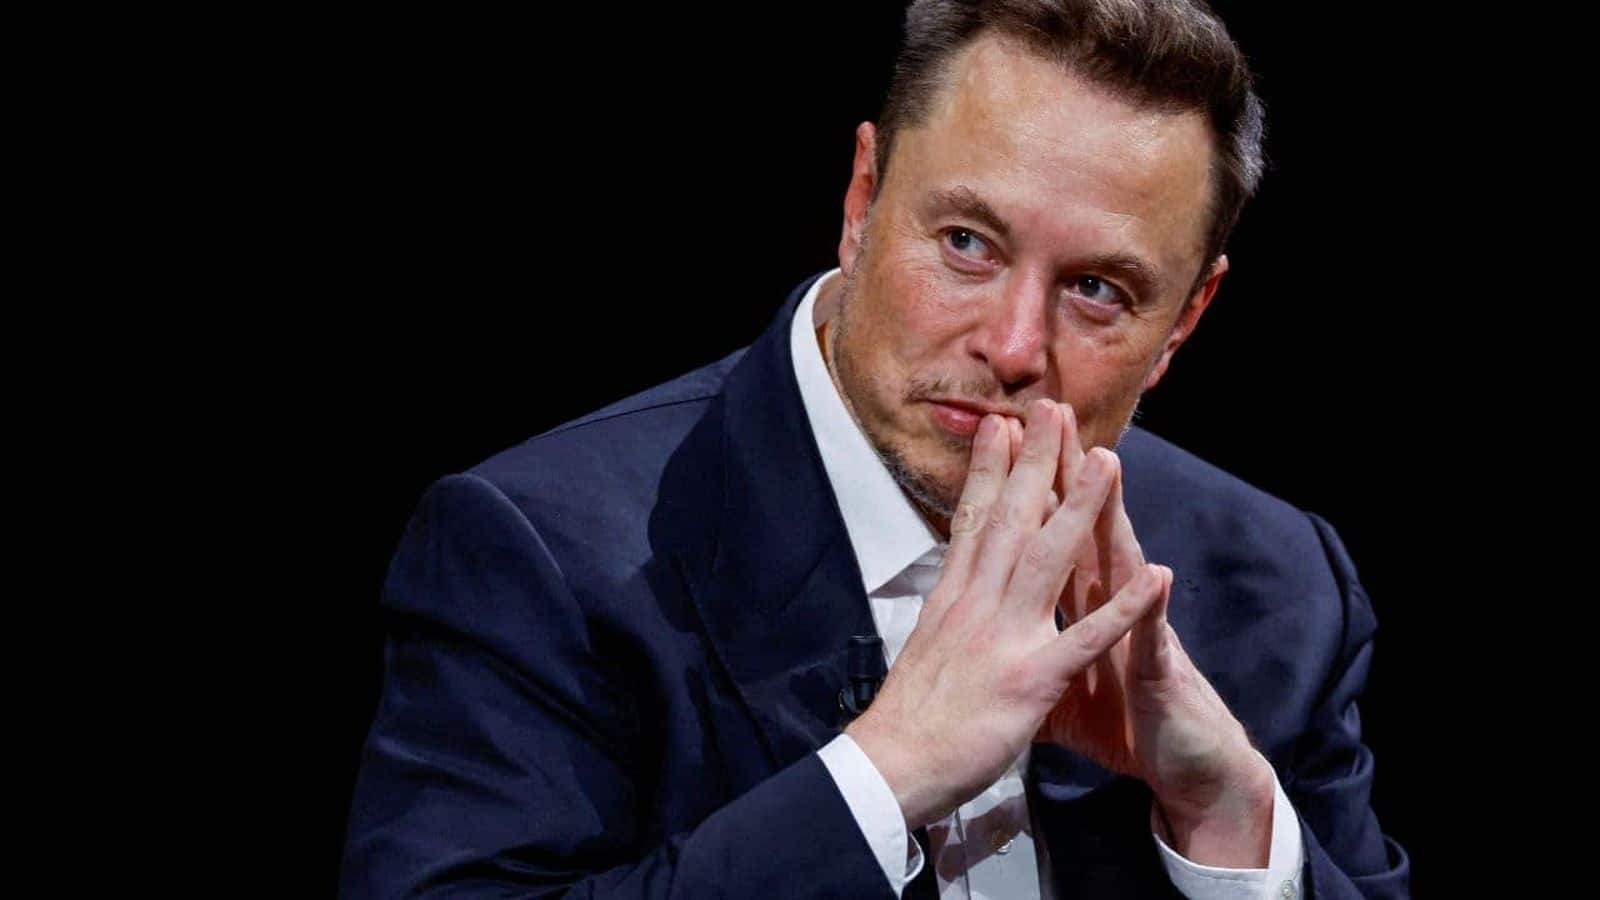 Tesla shareholders advised to reject Elon Musk's $56B pay package